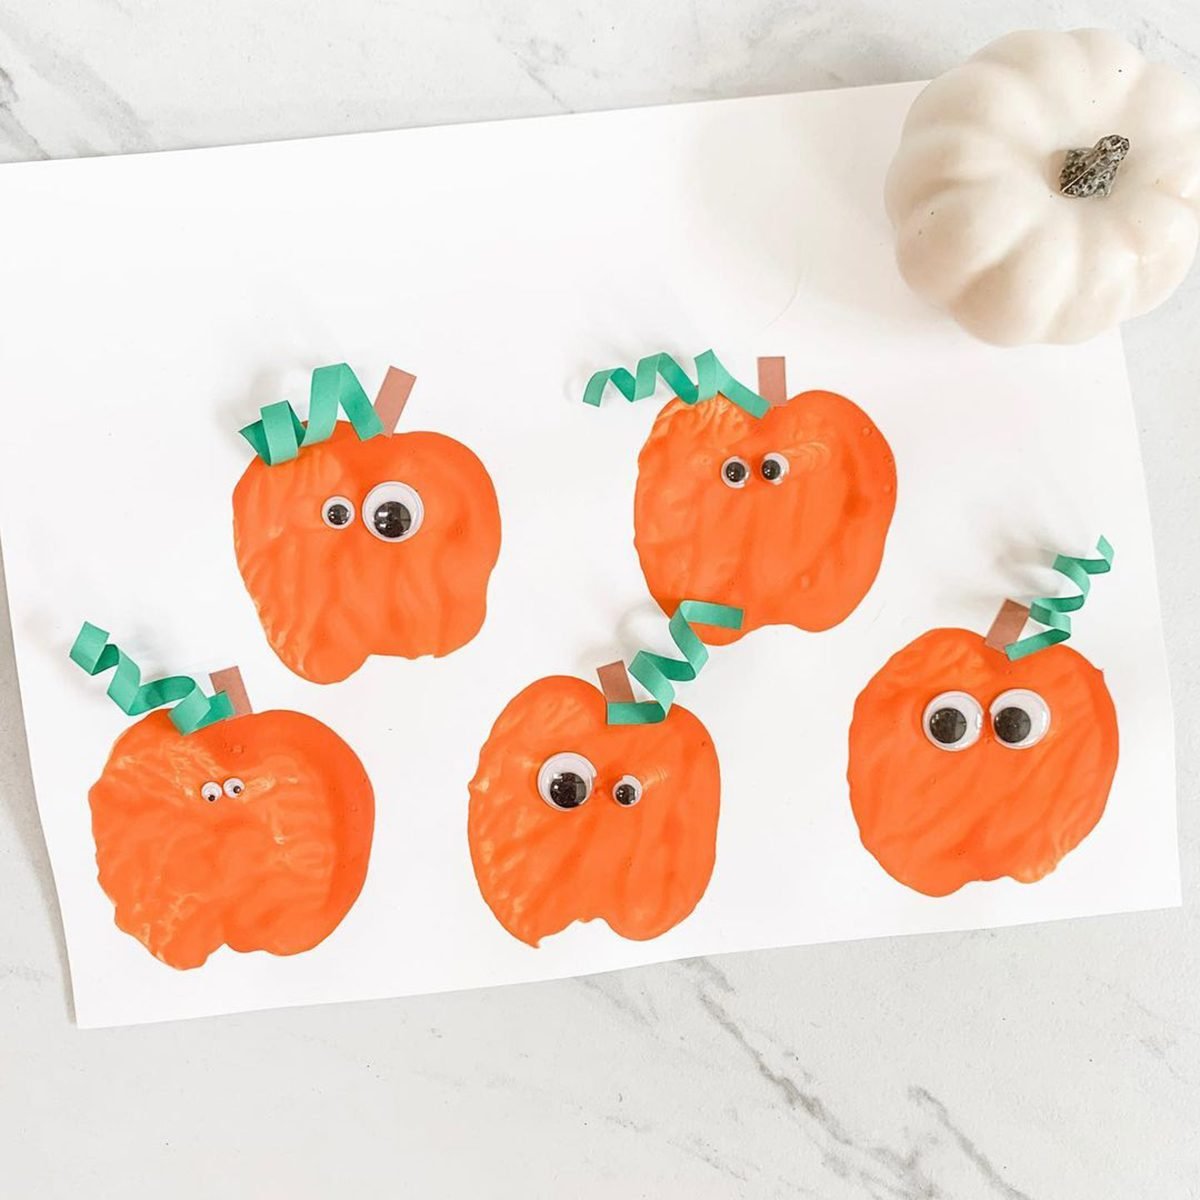 30 Easy Fall Crafts for Kids and Parents (Do Them in an Afternoon!)